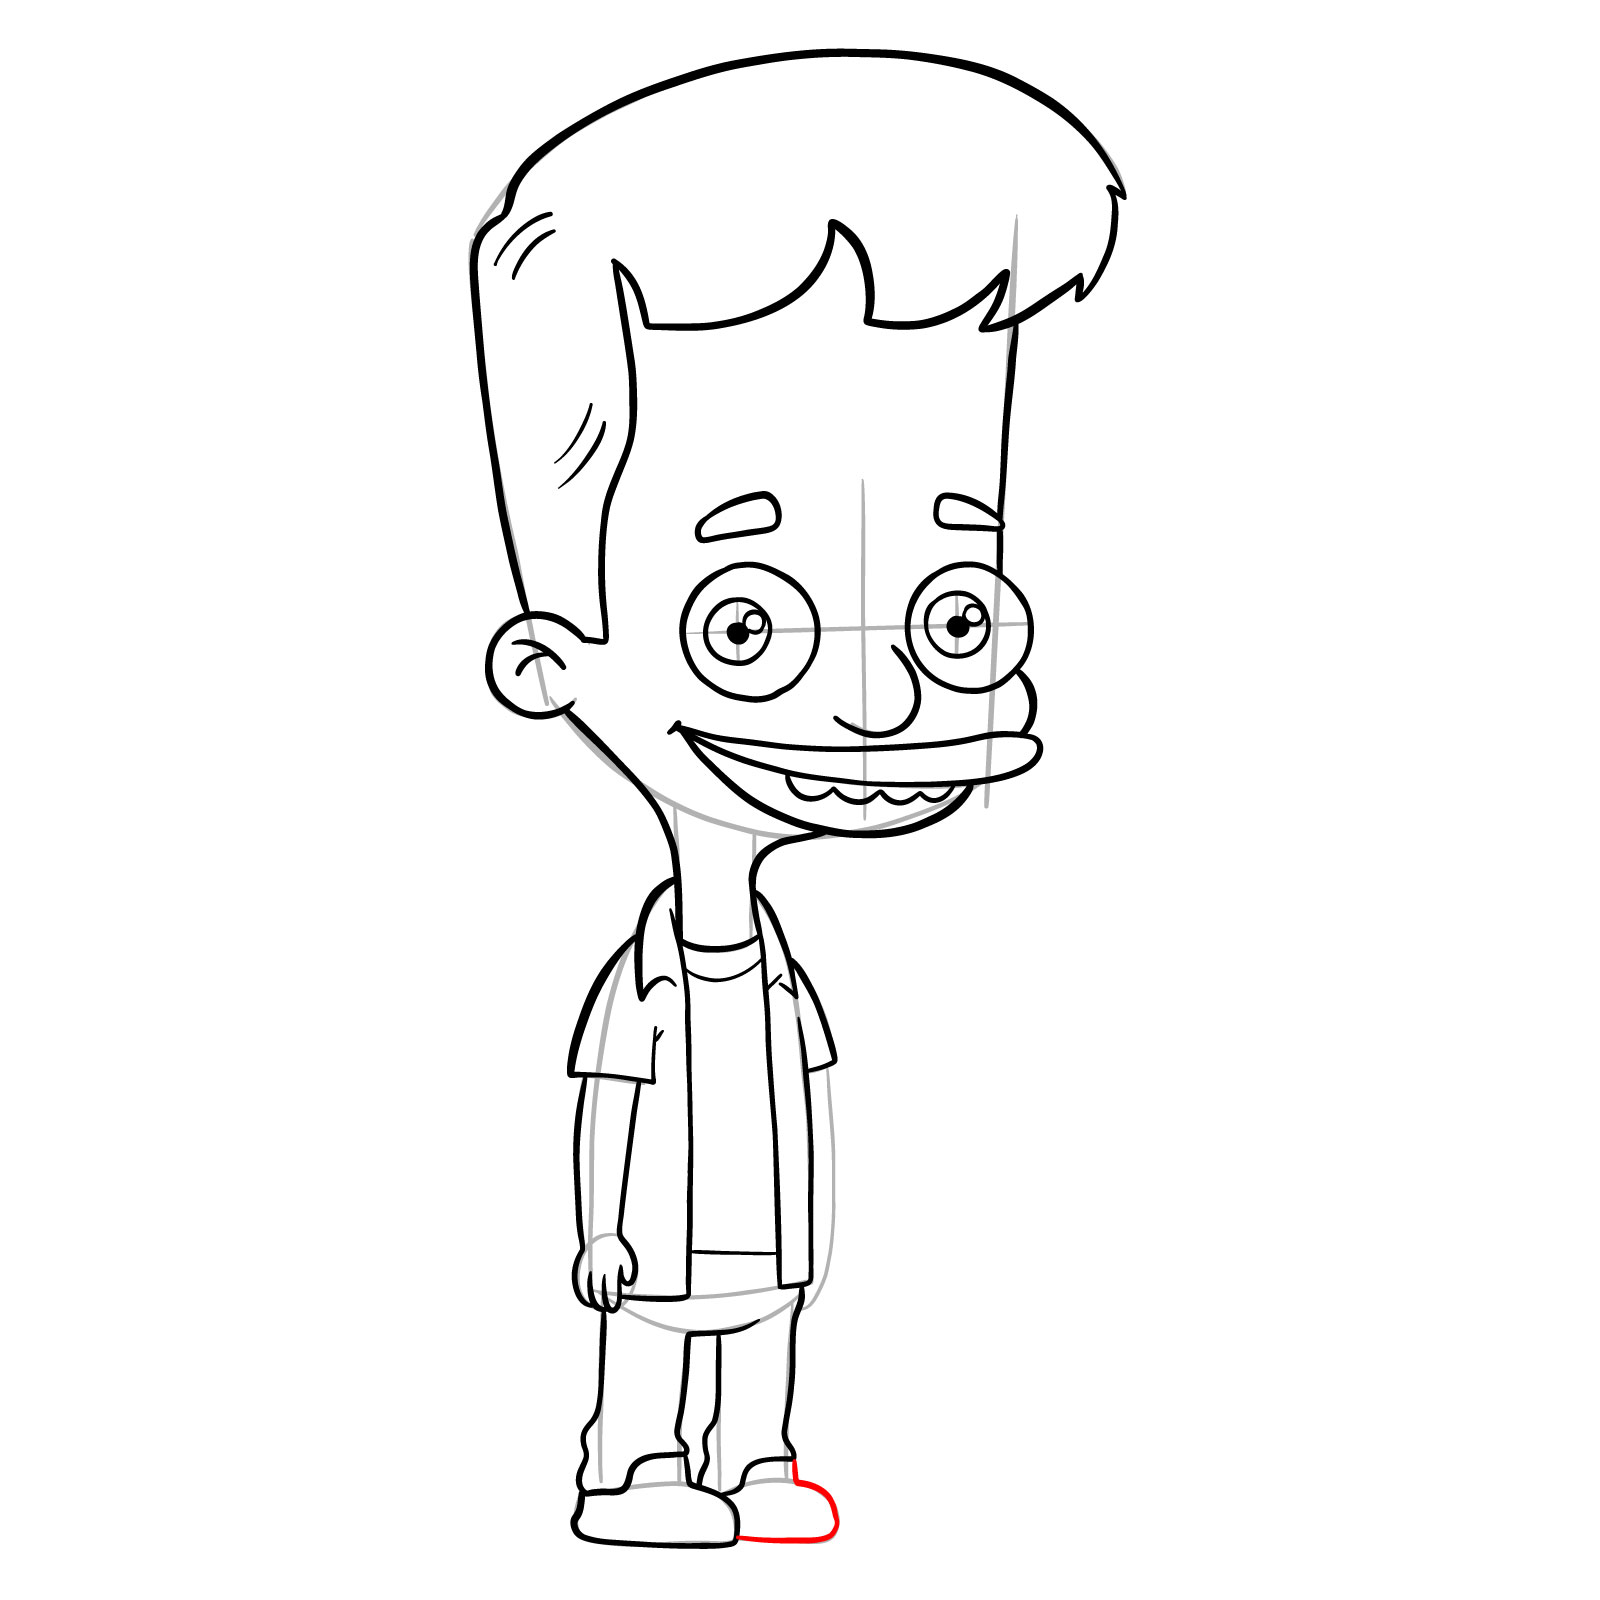 How to draw Nick Birch from Big Mouth - step 23